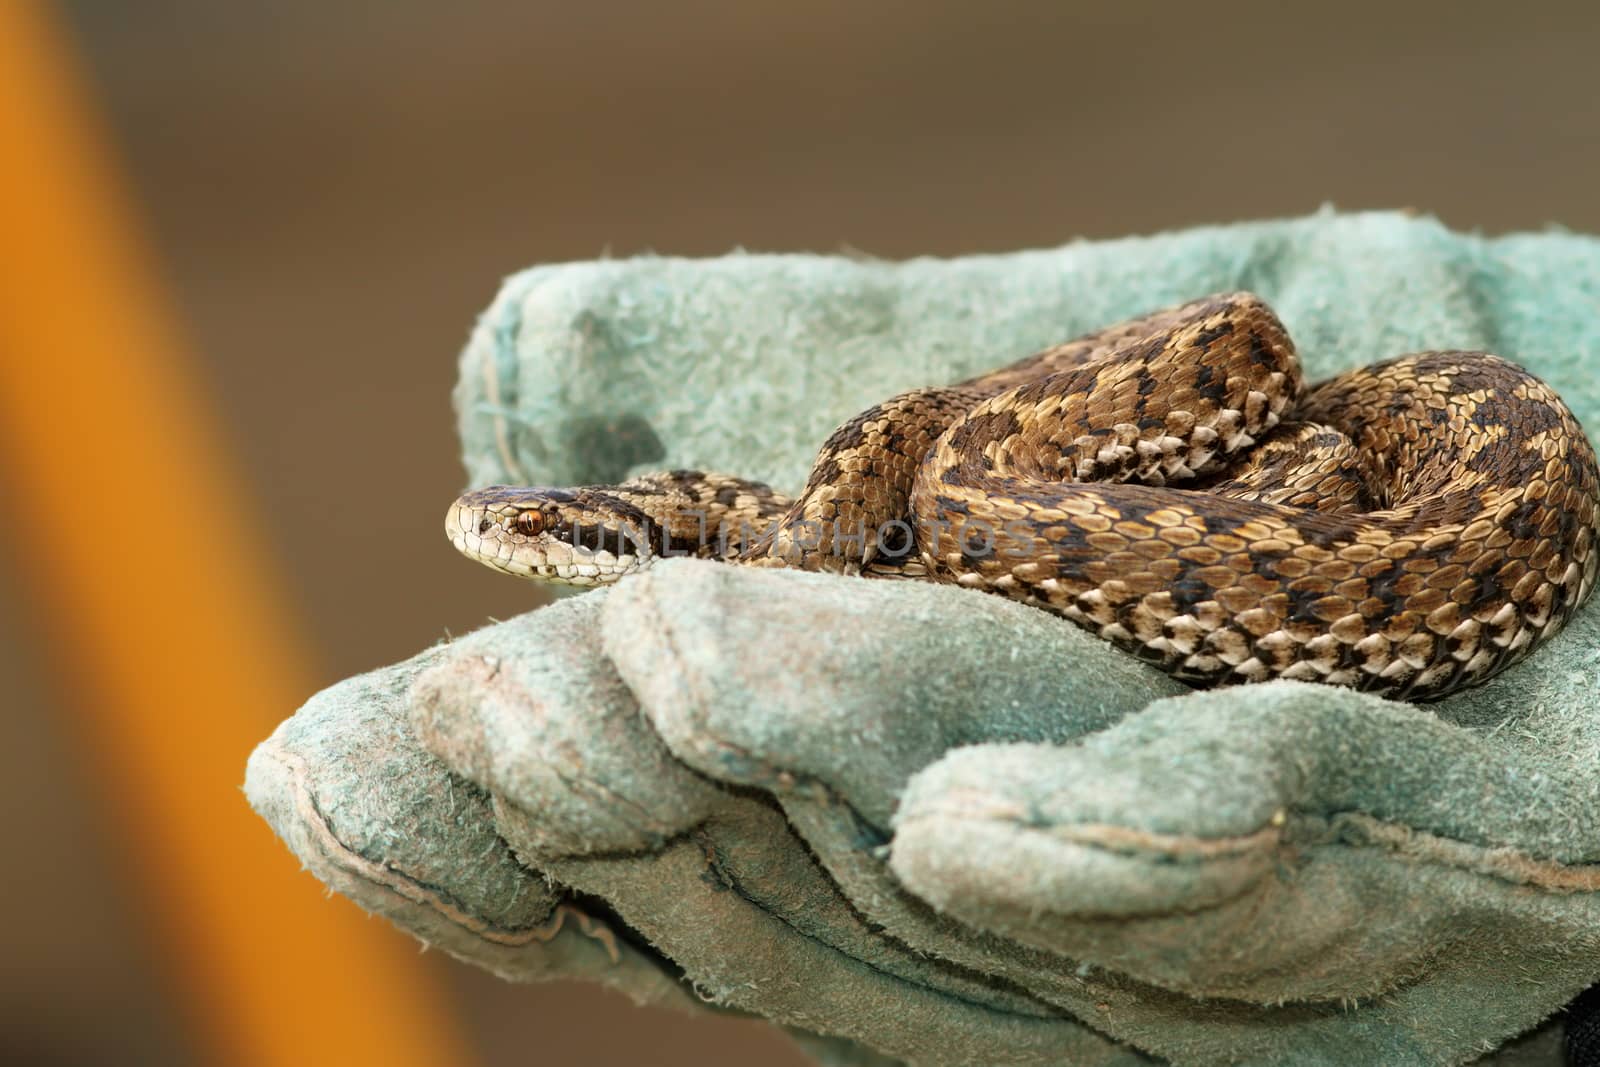 meadow viper in glove by taviphoto